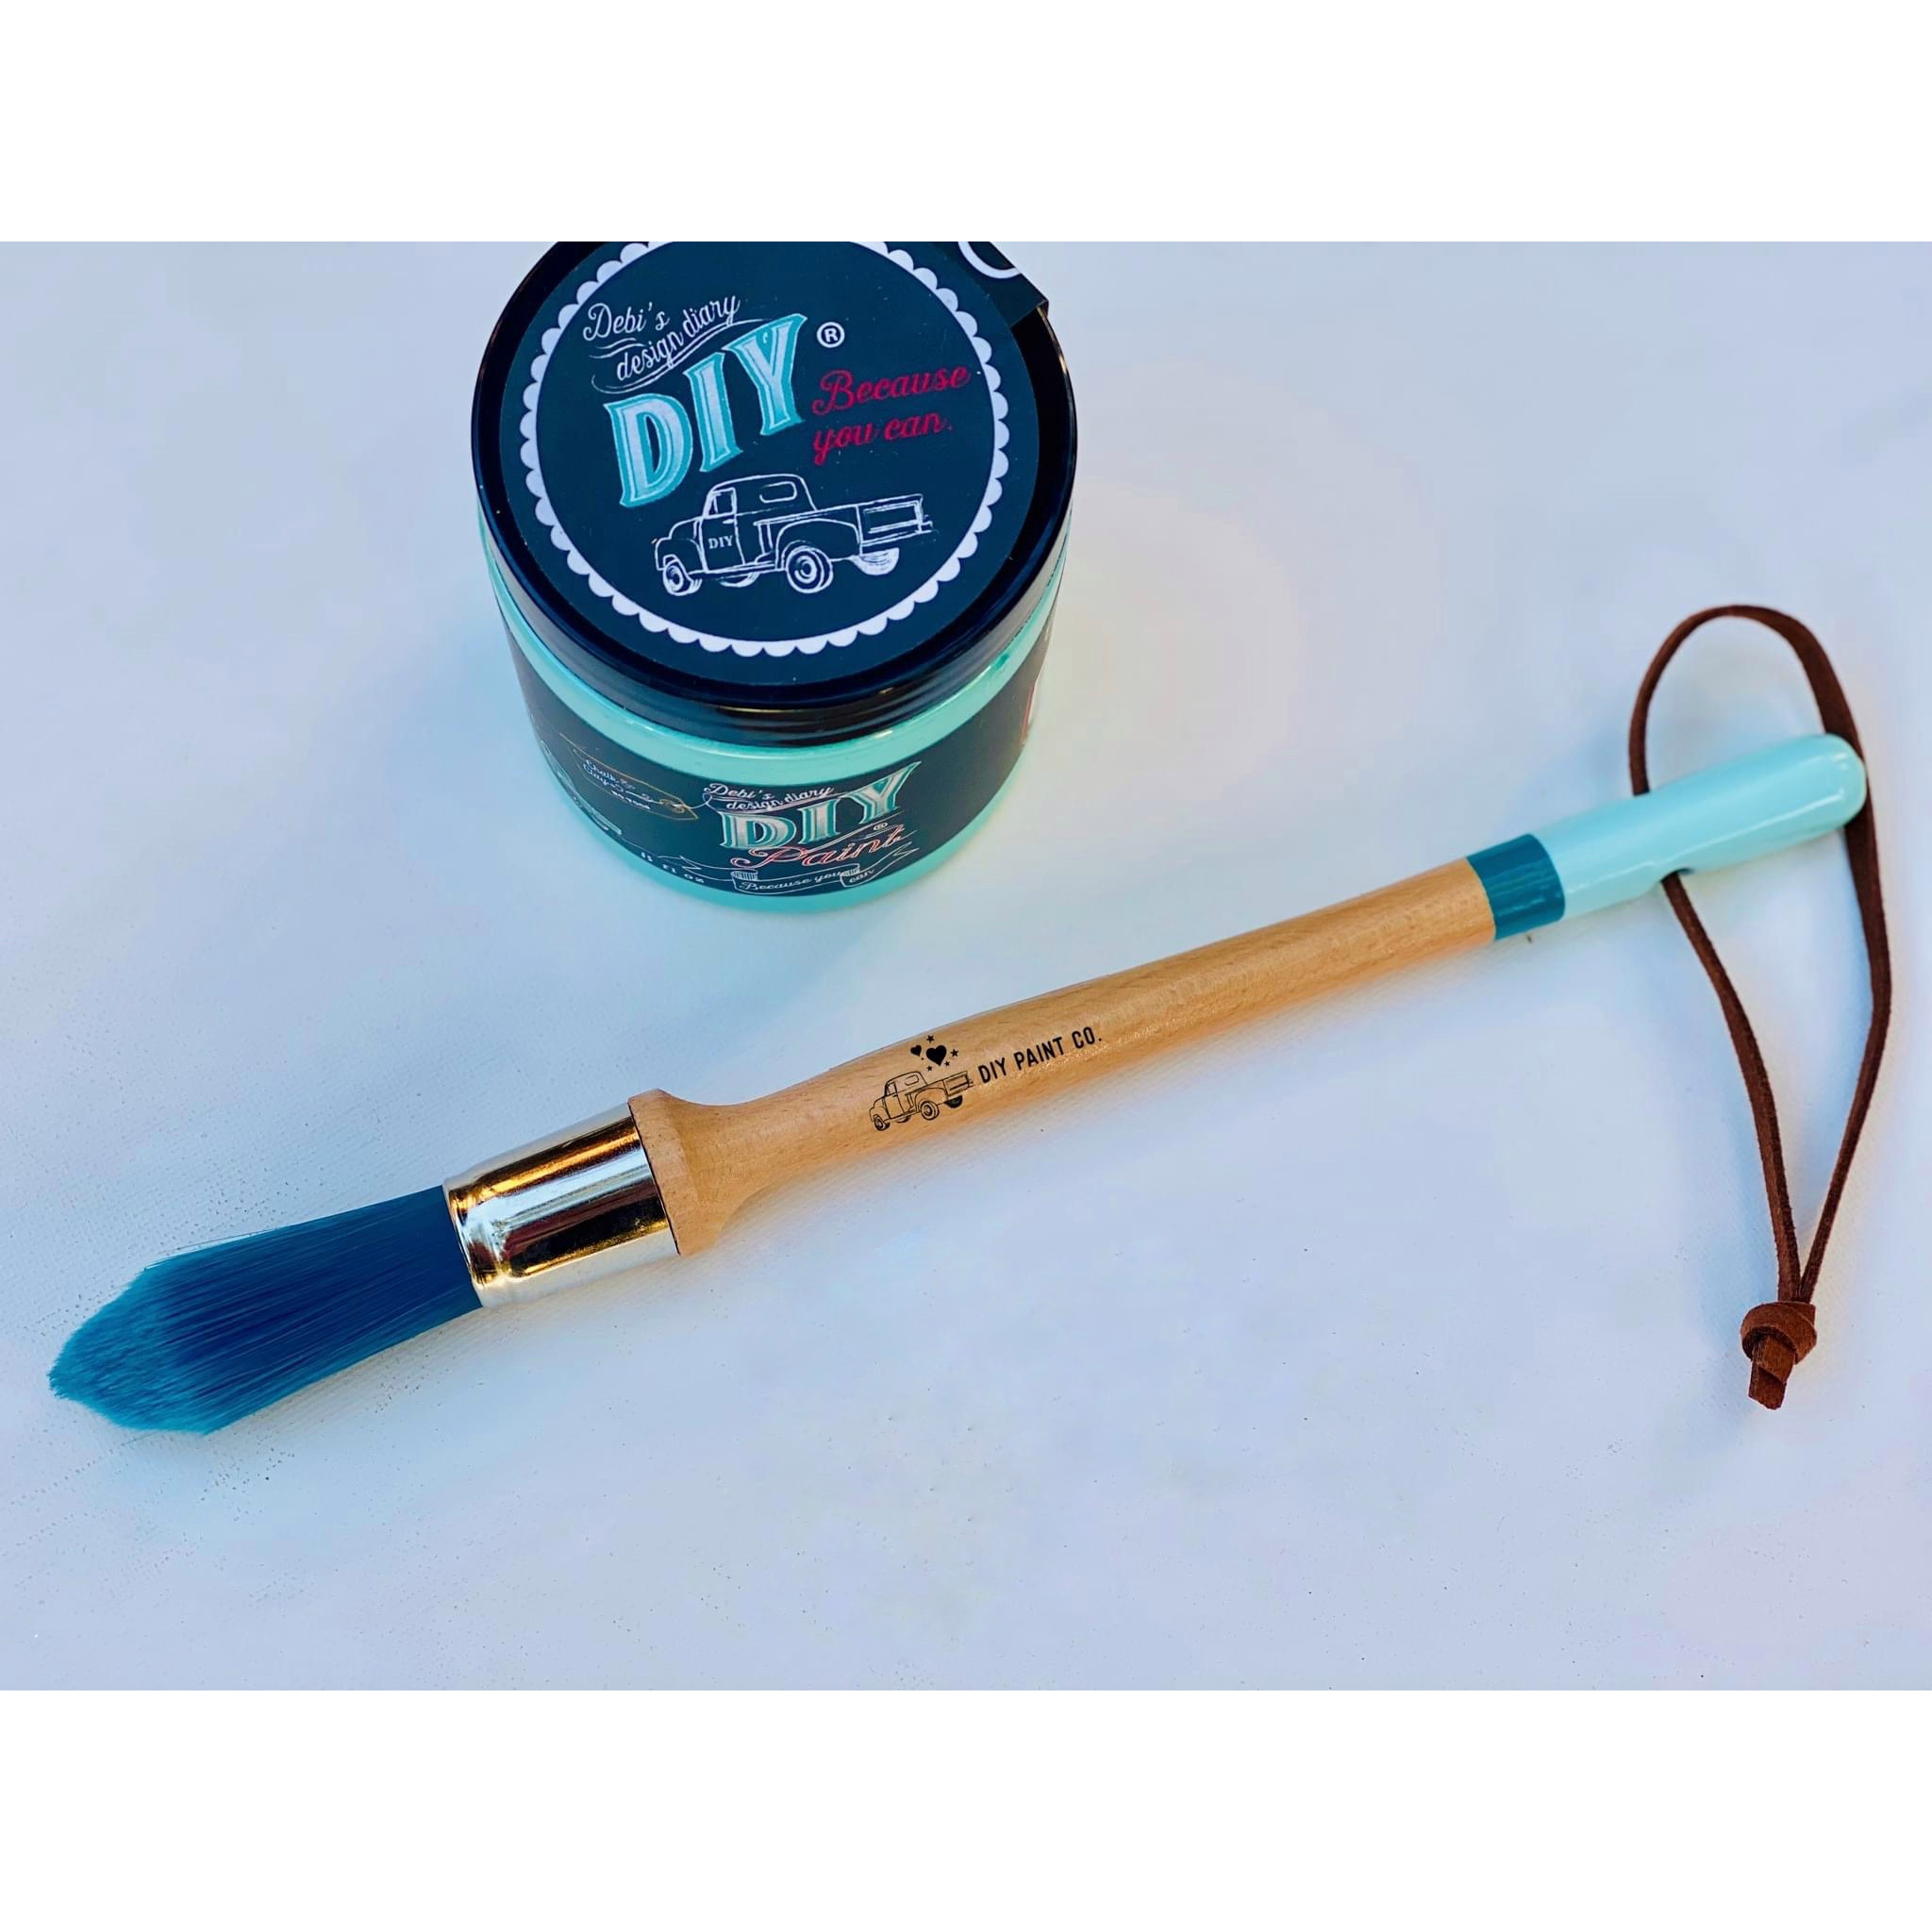 The Perfectionist - Paint Brush by DIY Paint – Milton's Daughter